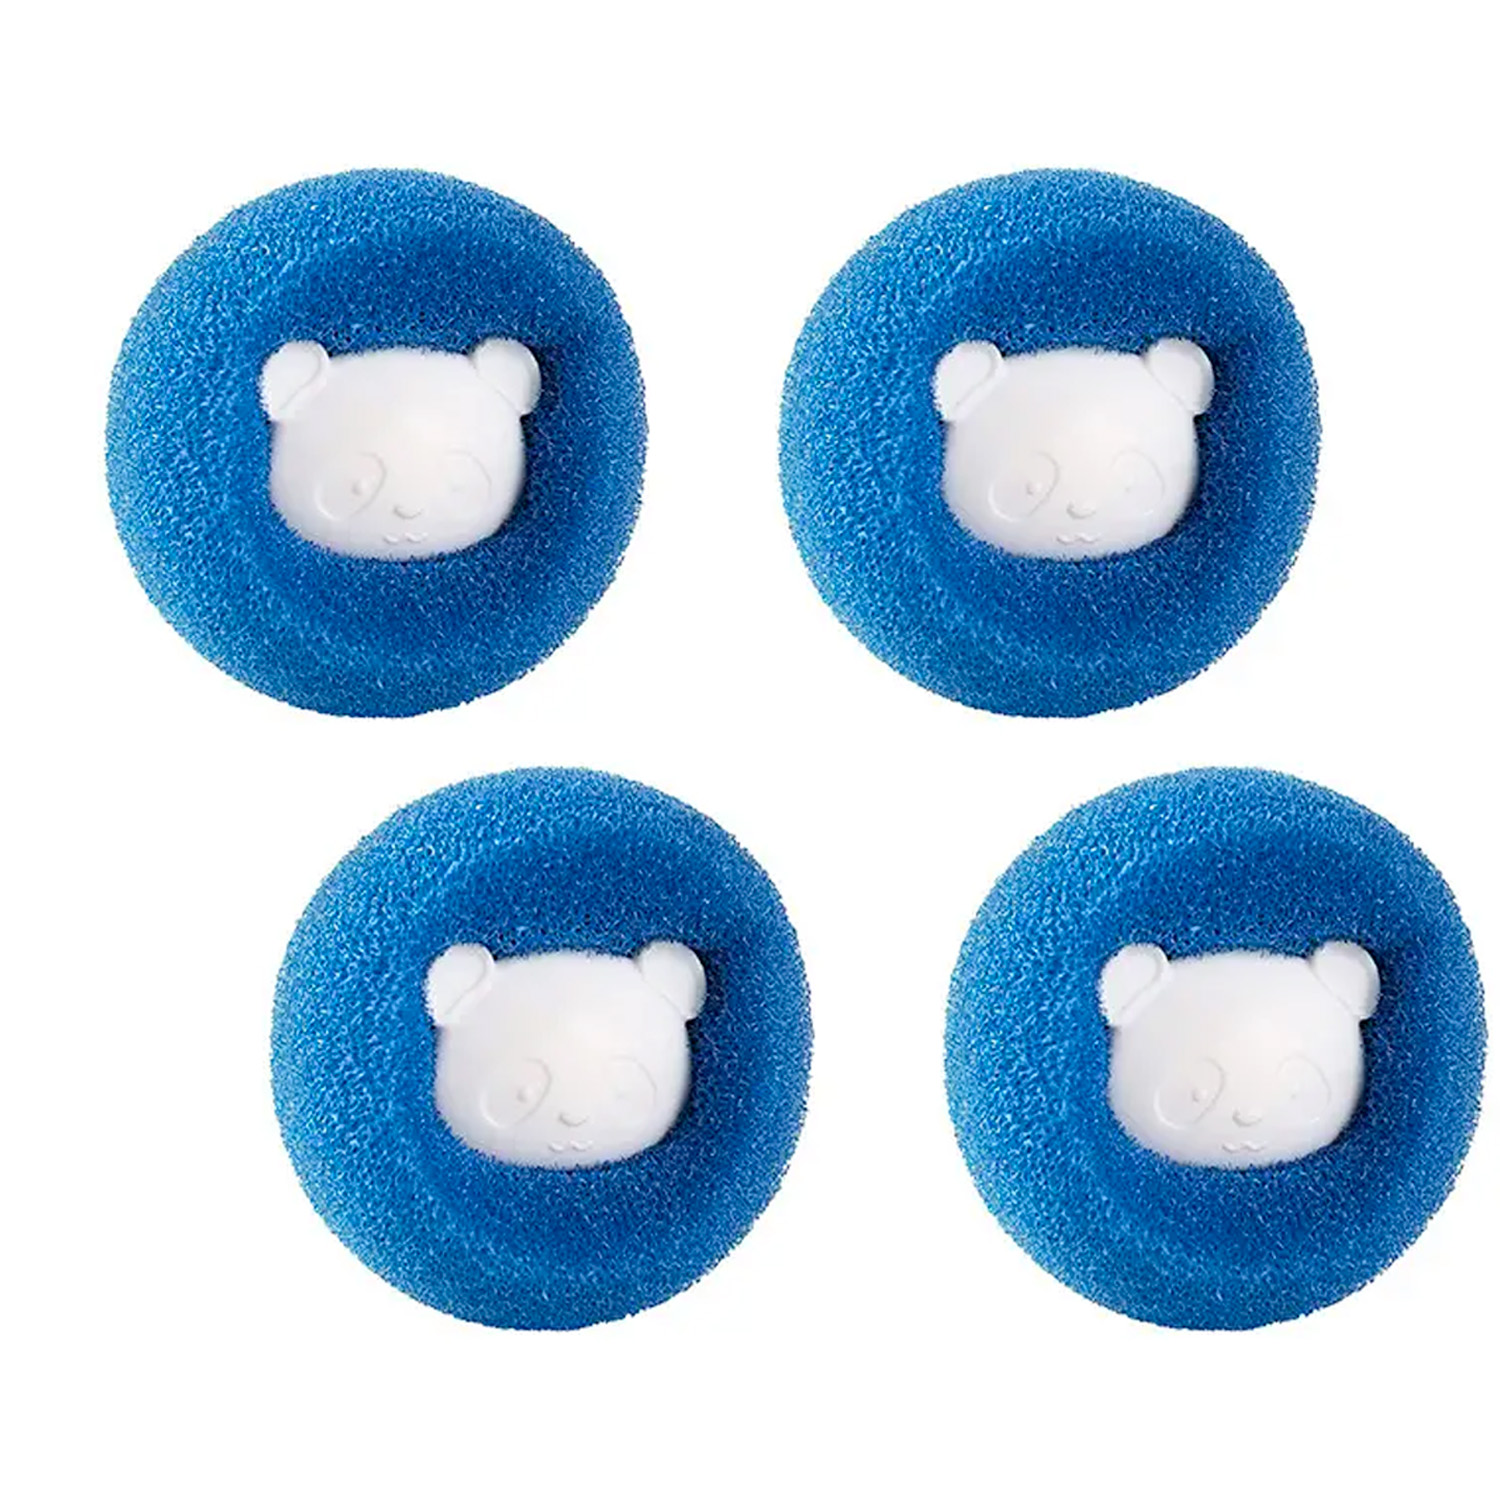 4 Pcs Laundry Ball Hair Remover Pet Clothes Cleaning Tool Cat Dogs Hairs Removes Washing Machine Filtering Ball